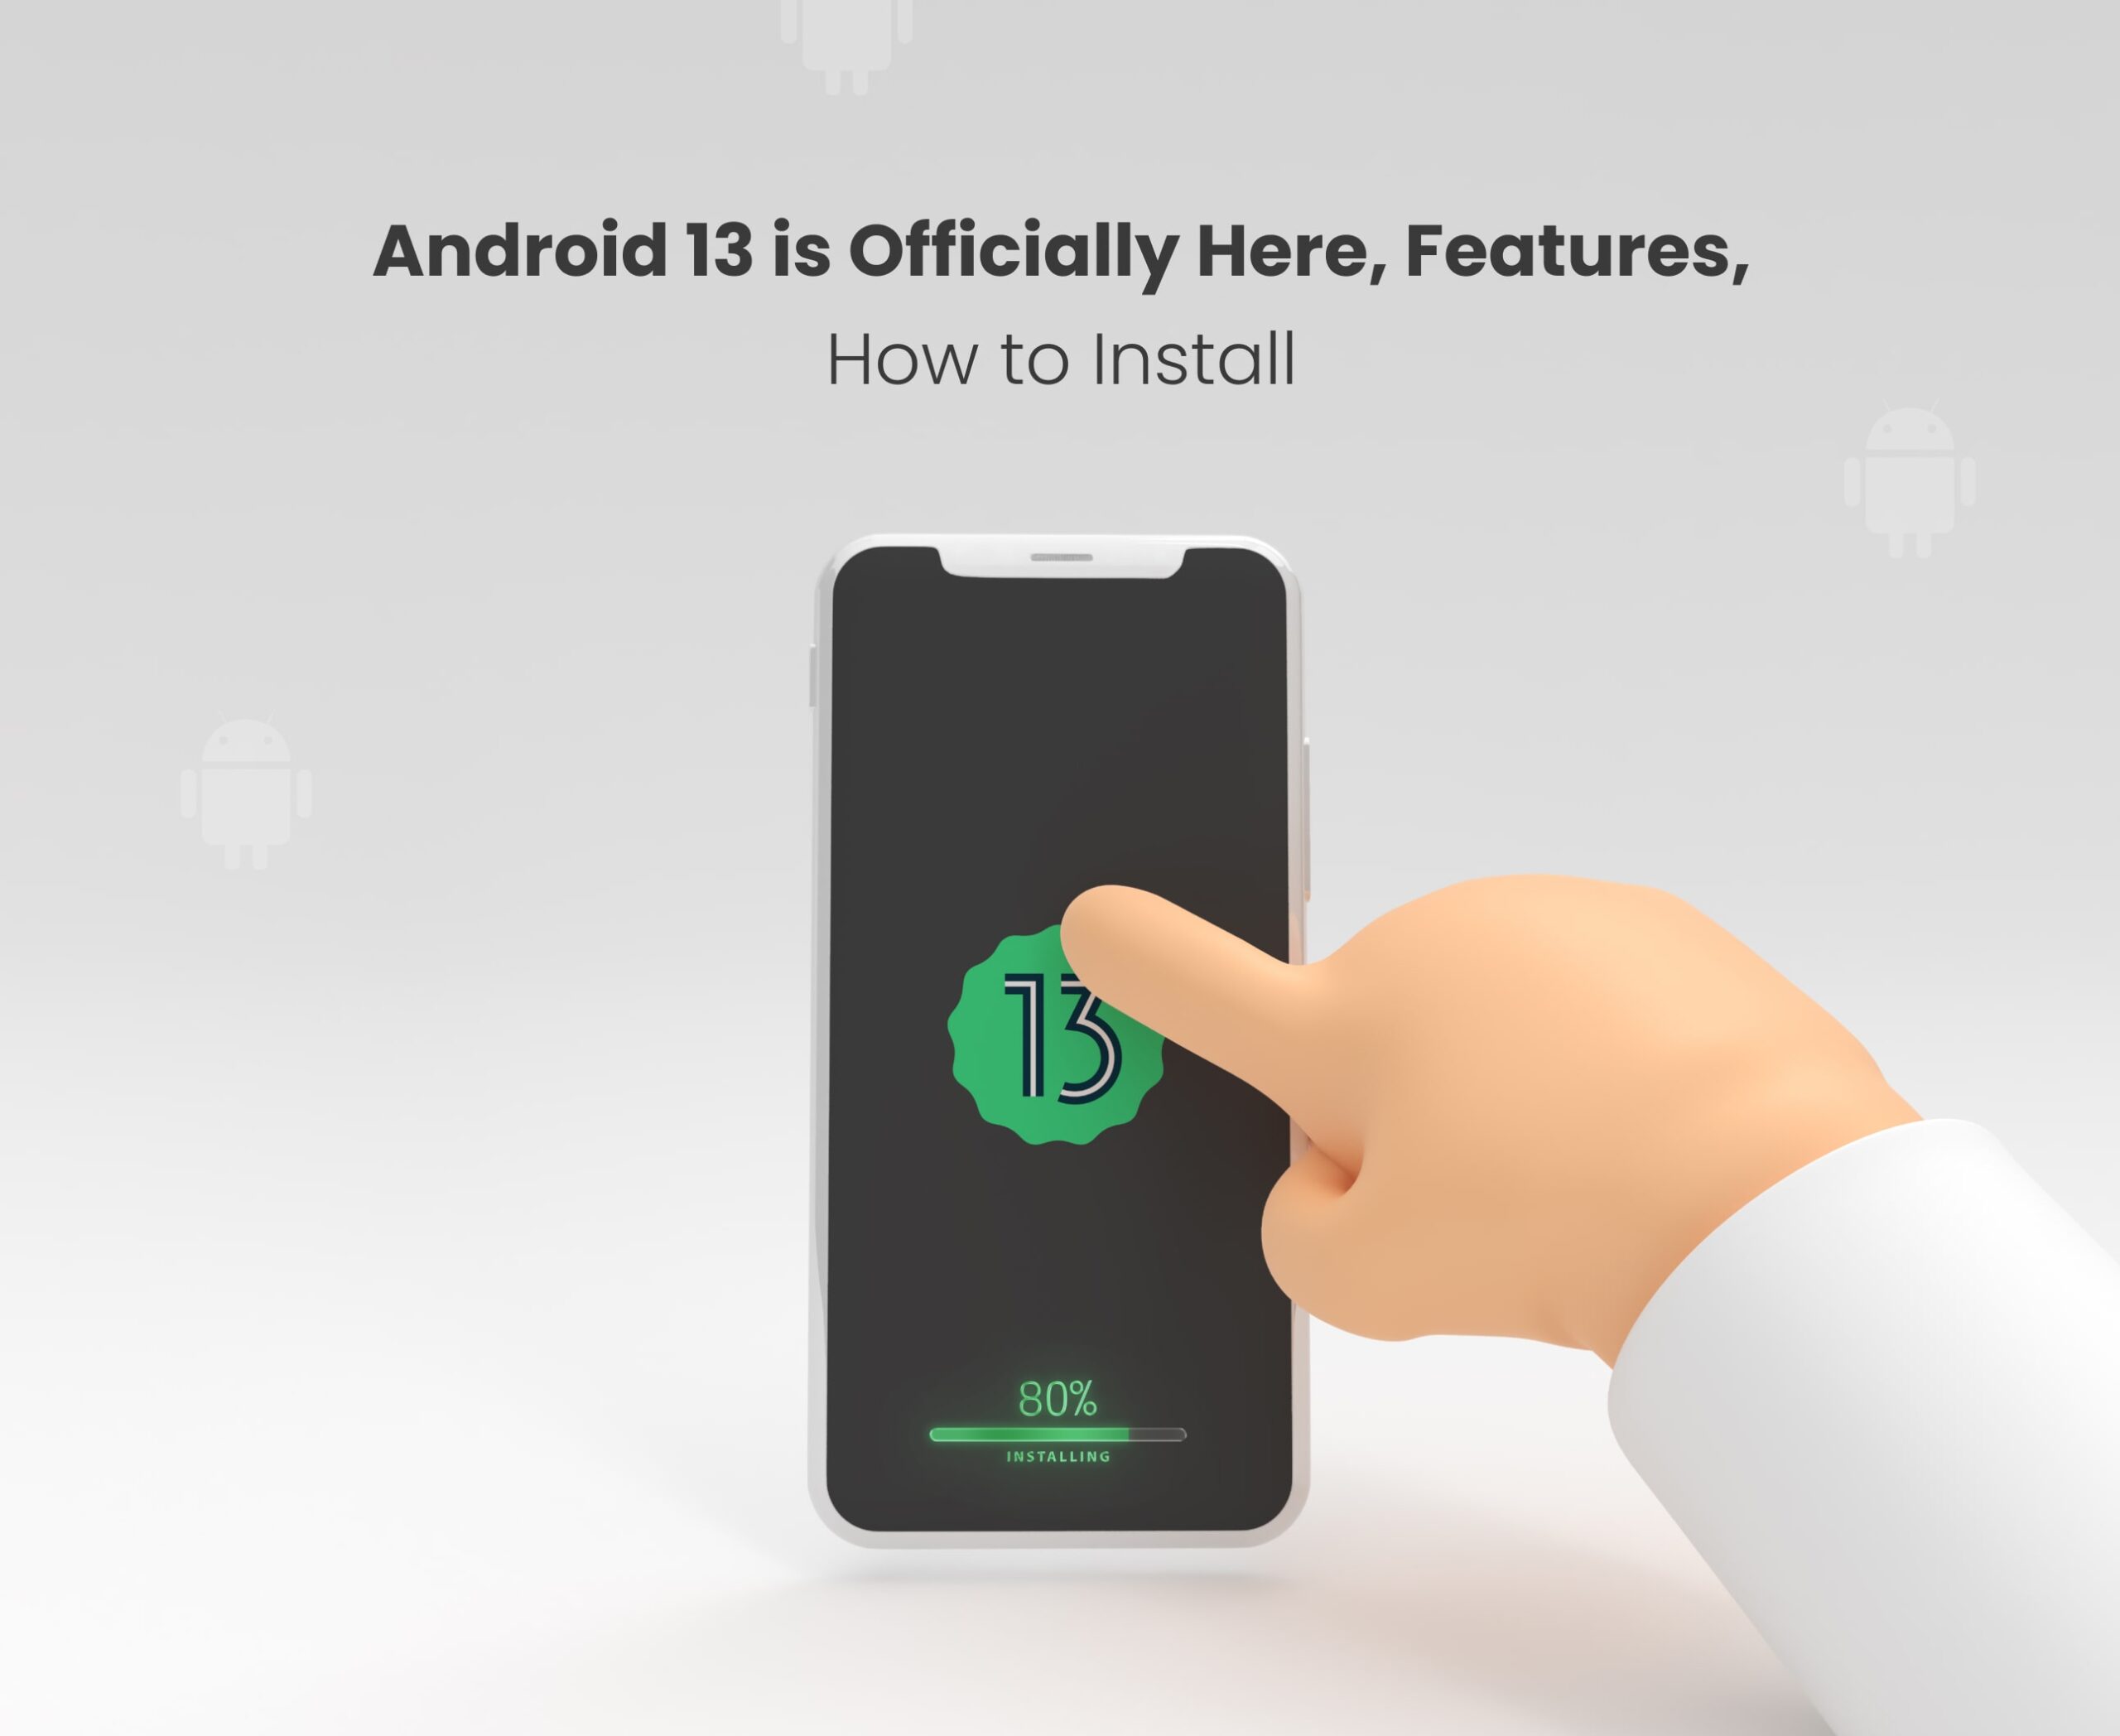 Android 13 launched